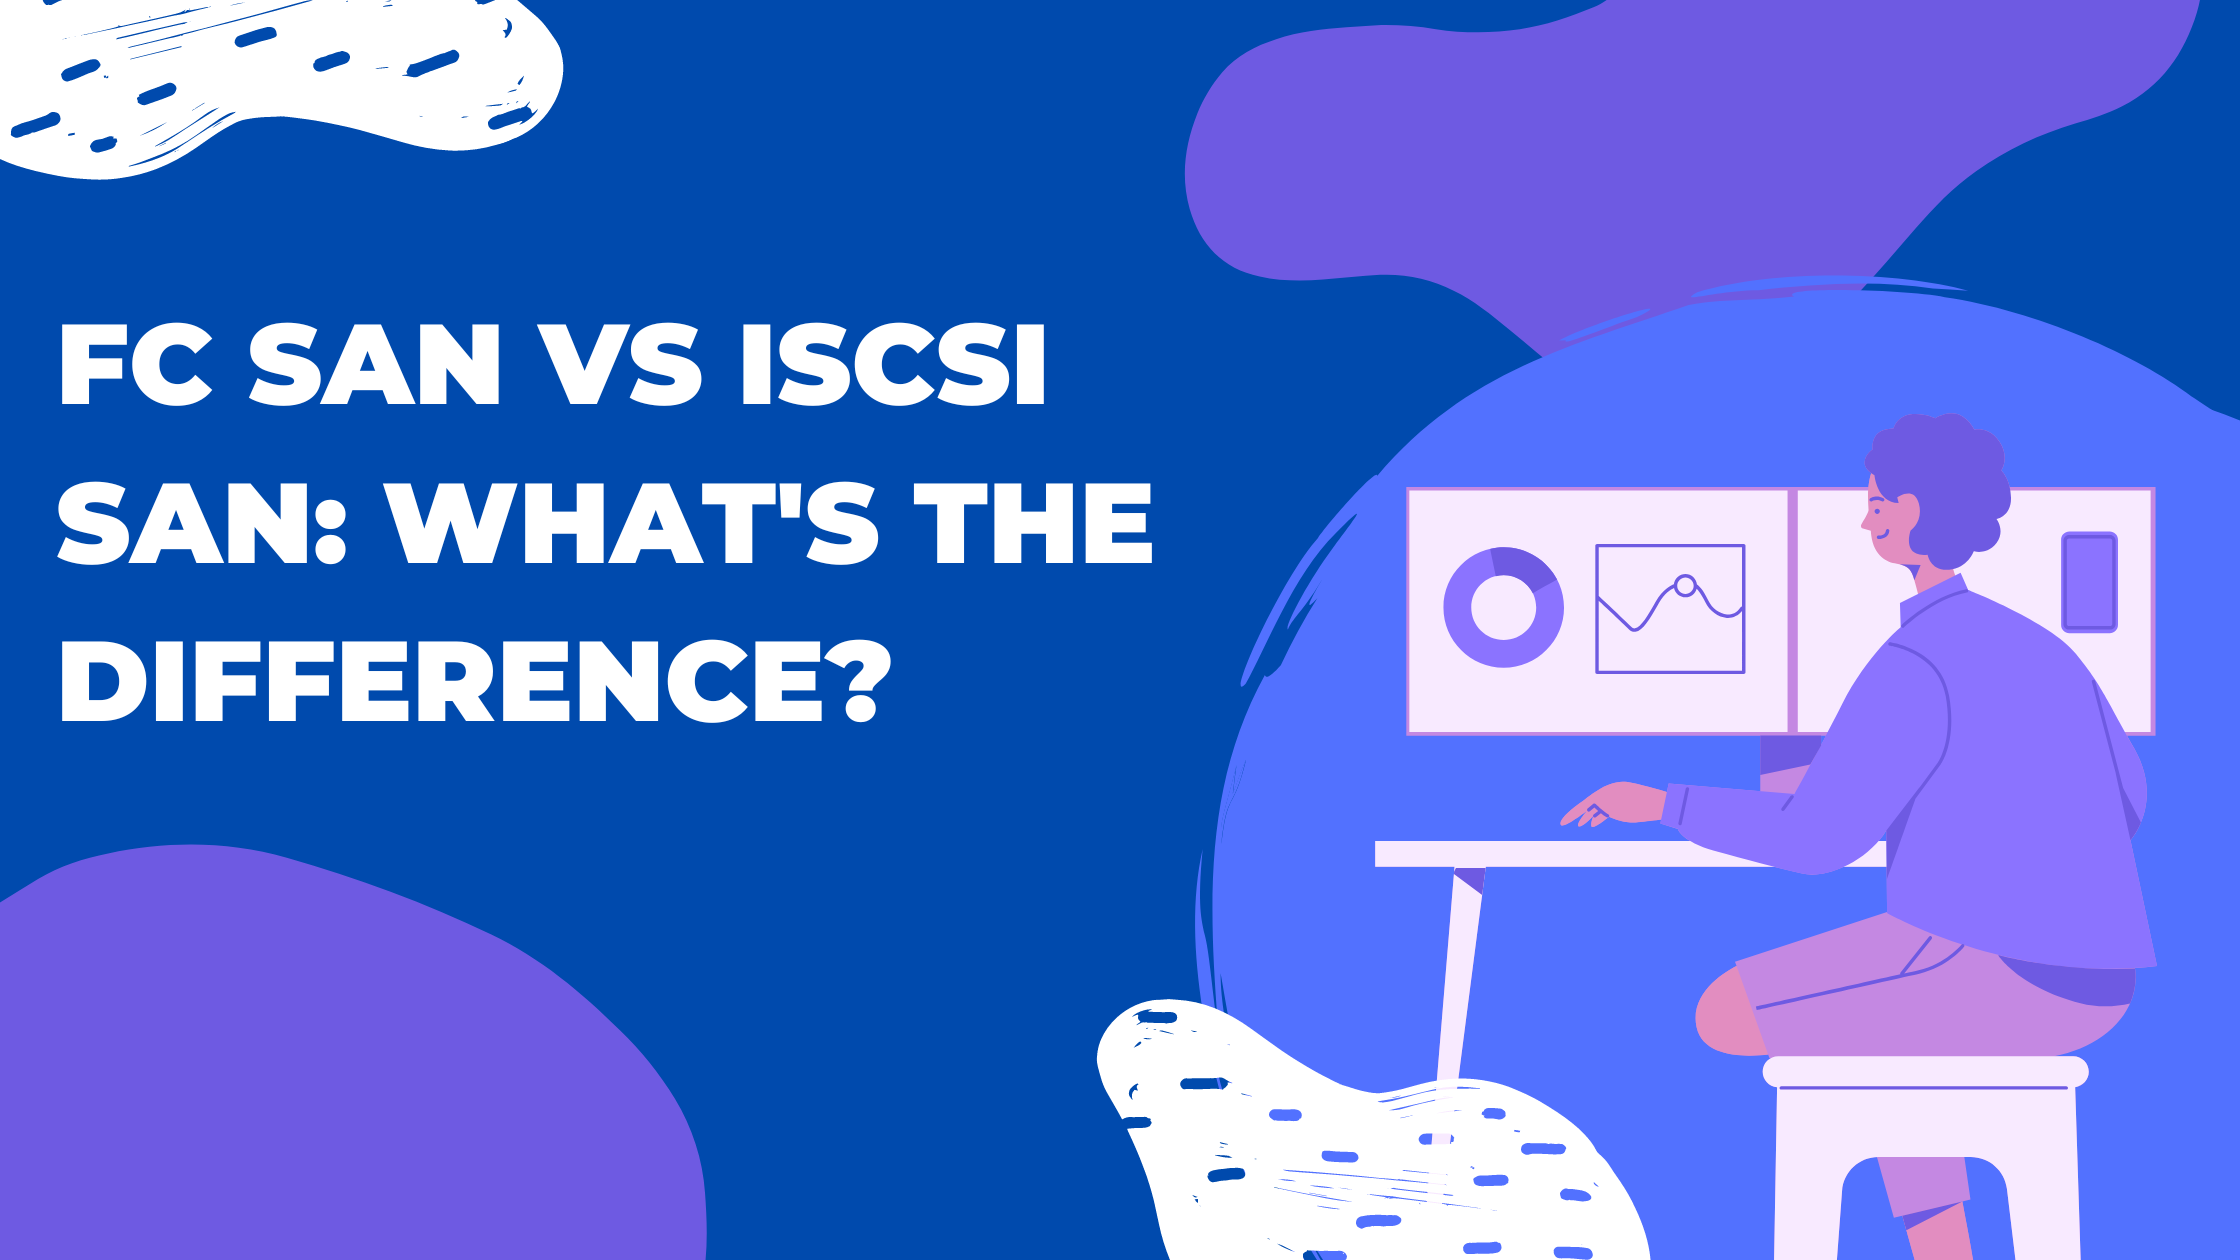 FC SAN vs iSCSI SAN: What's the Difference?